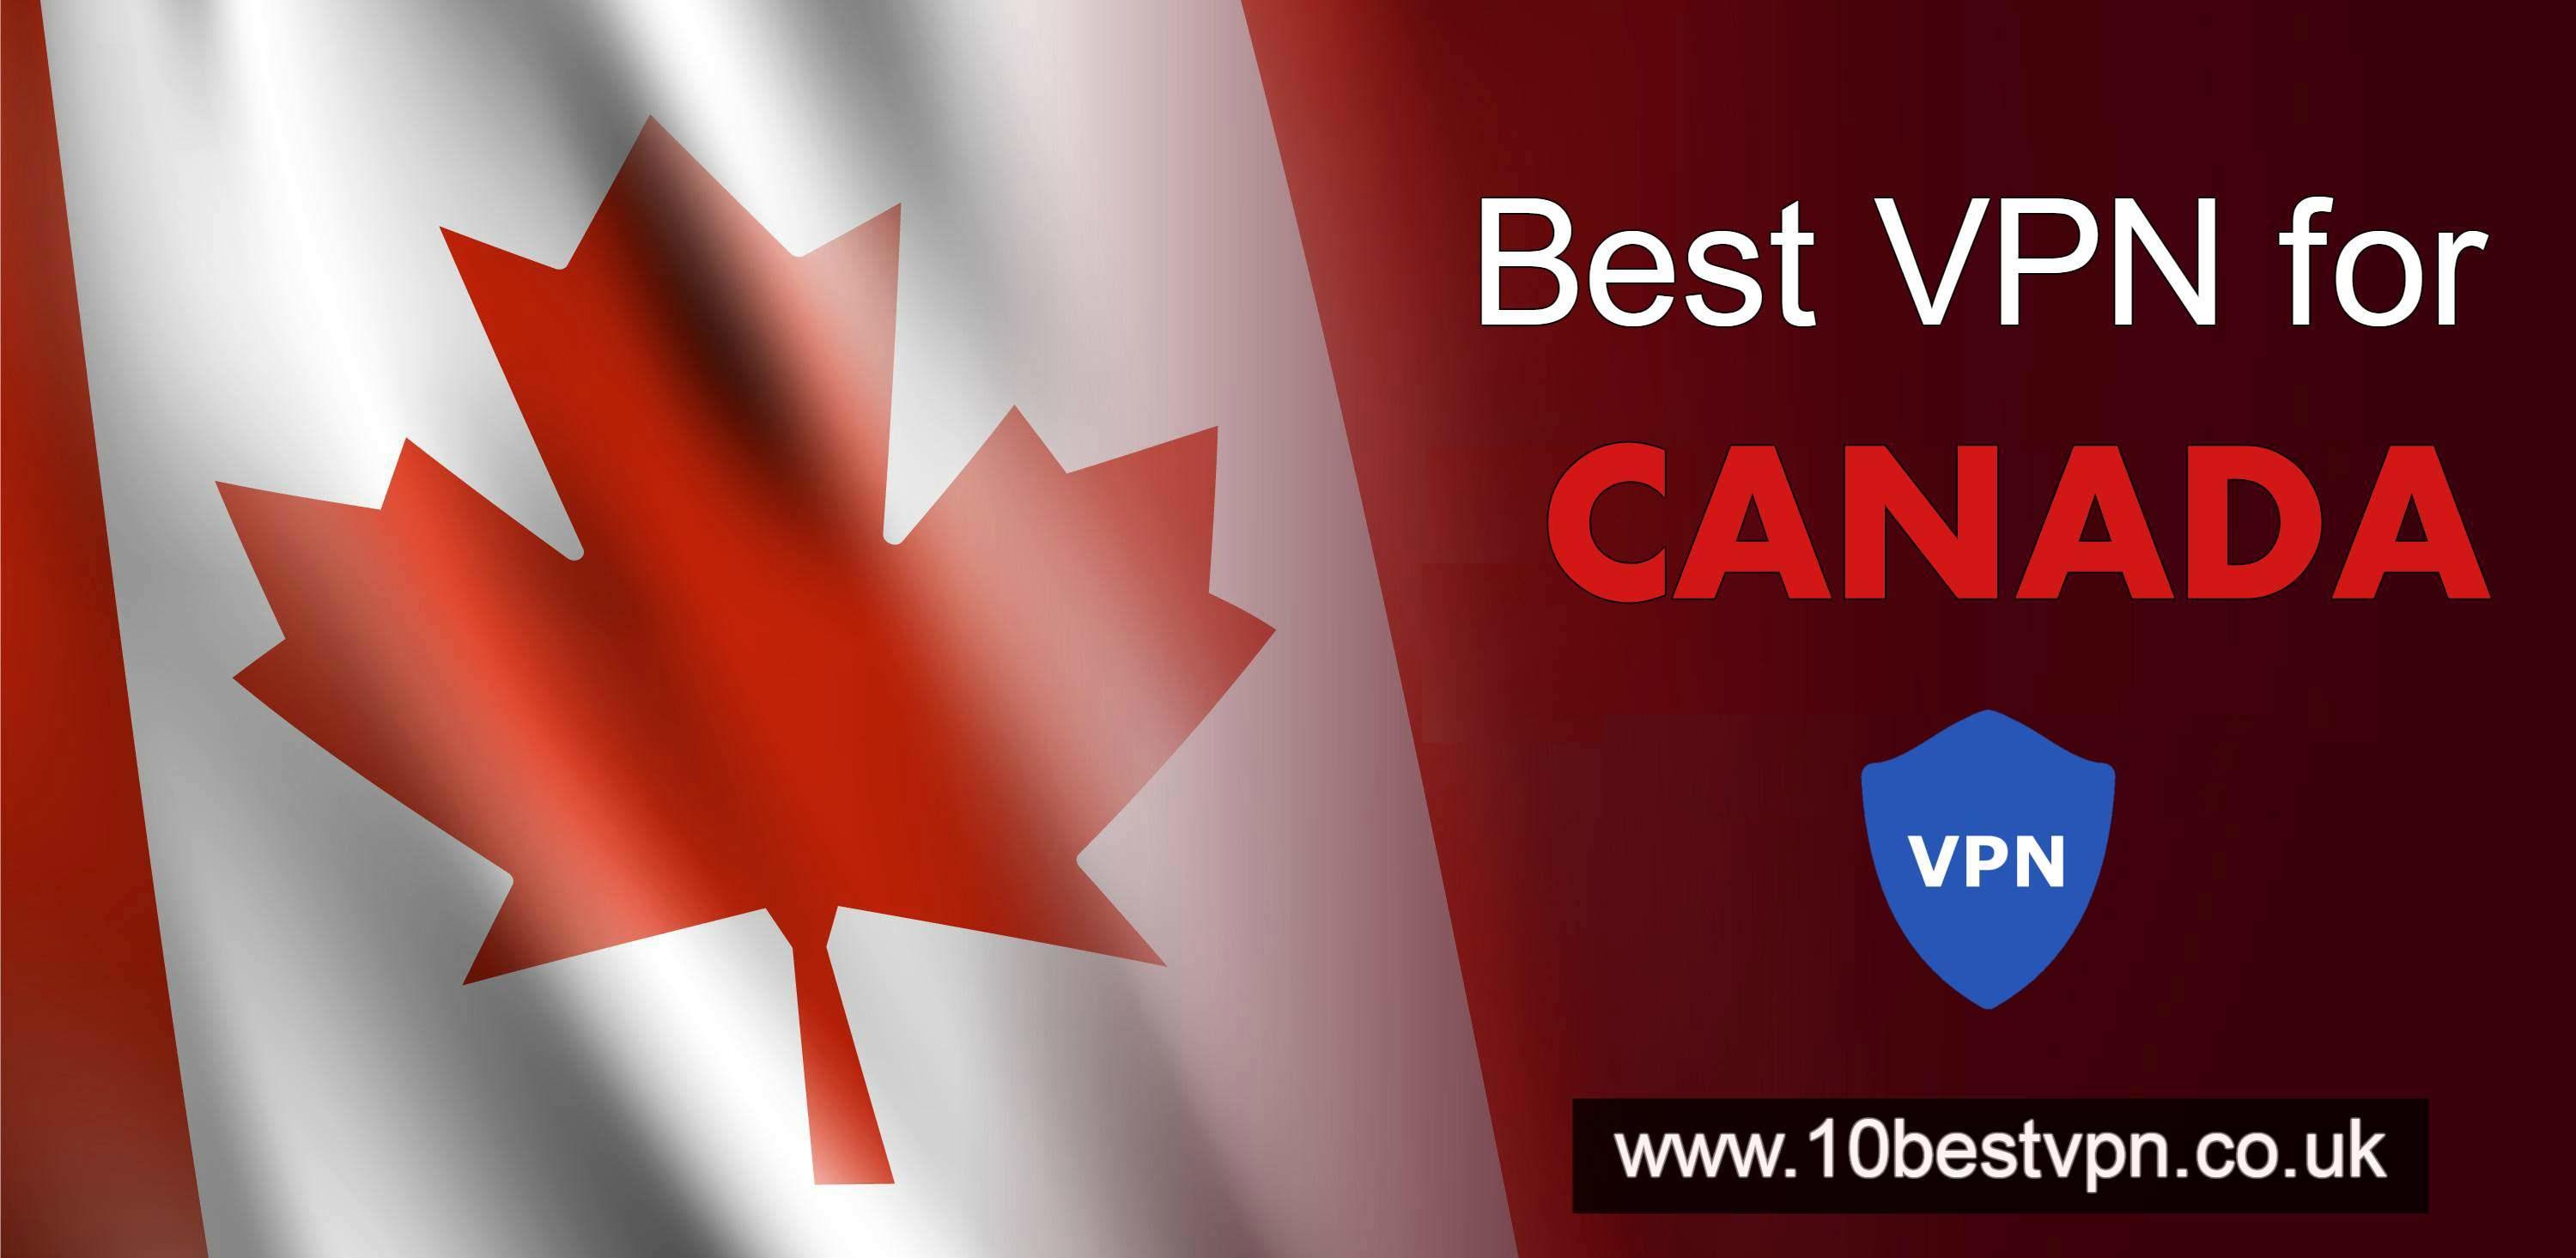 Image - Canada is one of countries which have many internet users. But due to this, Data Piracy, Snooping and Hacking...